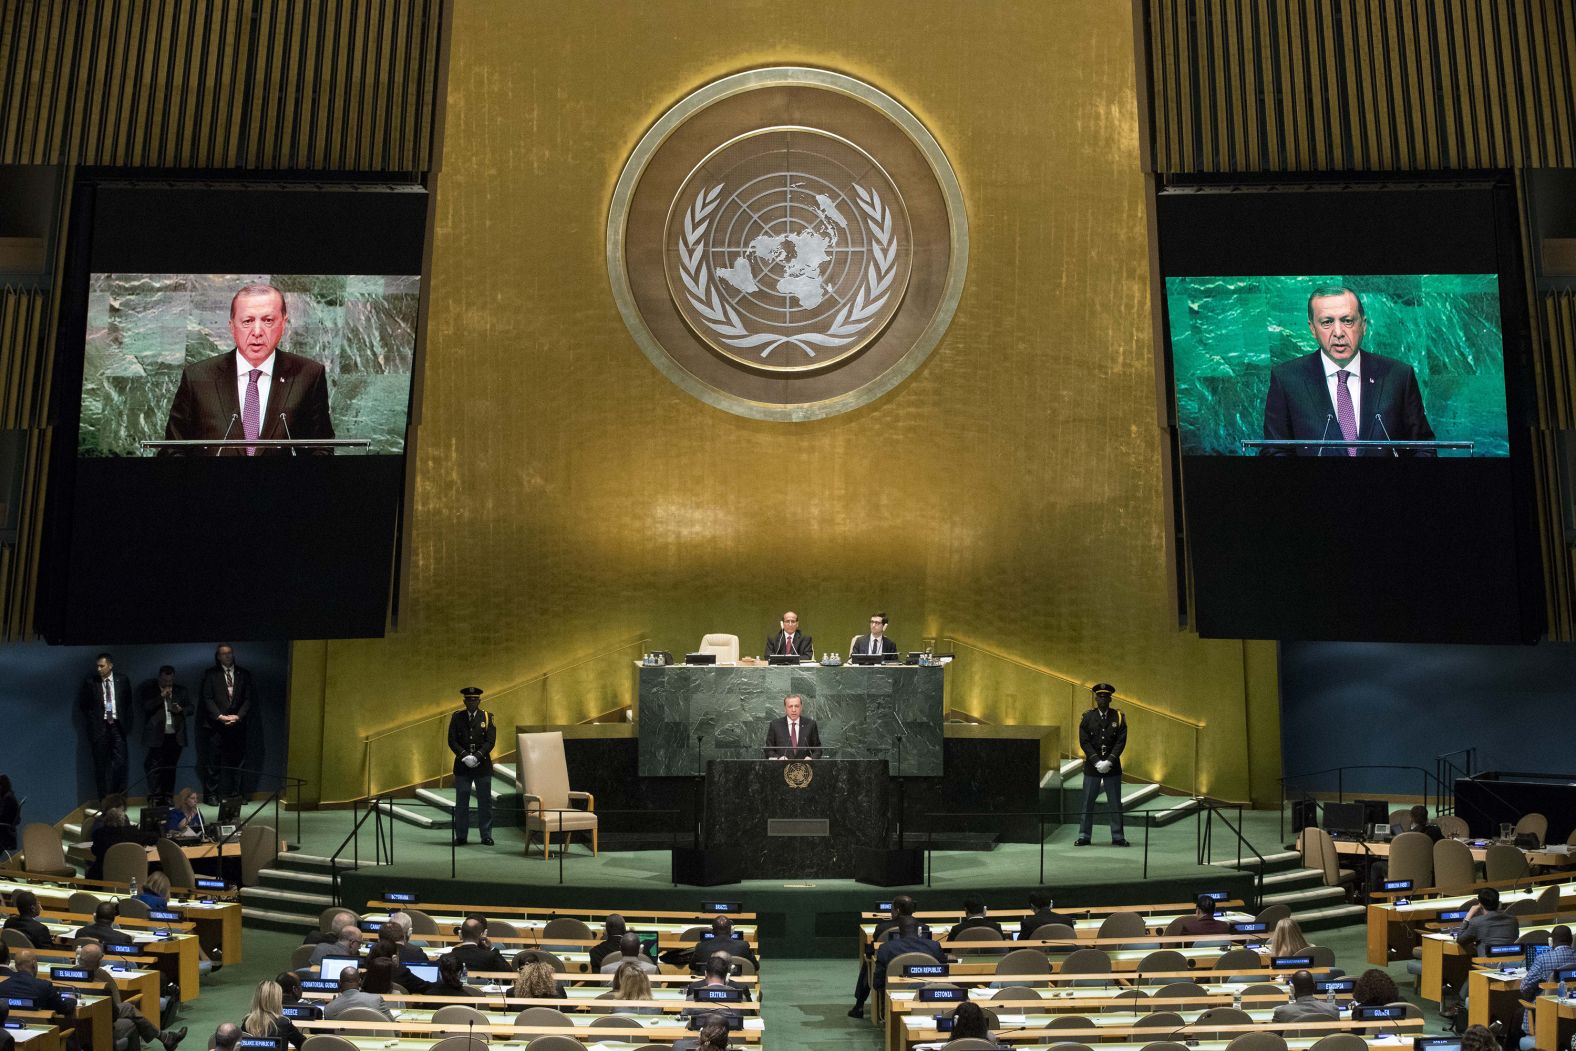 Erdogan addresses the UN General Assembly in New York in September 2016.